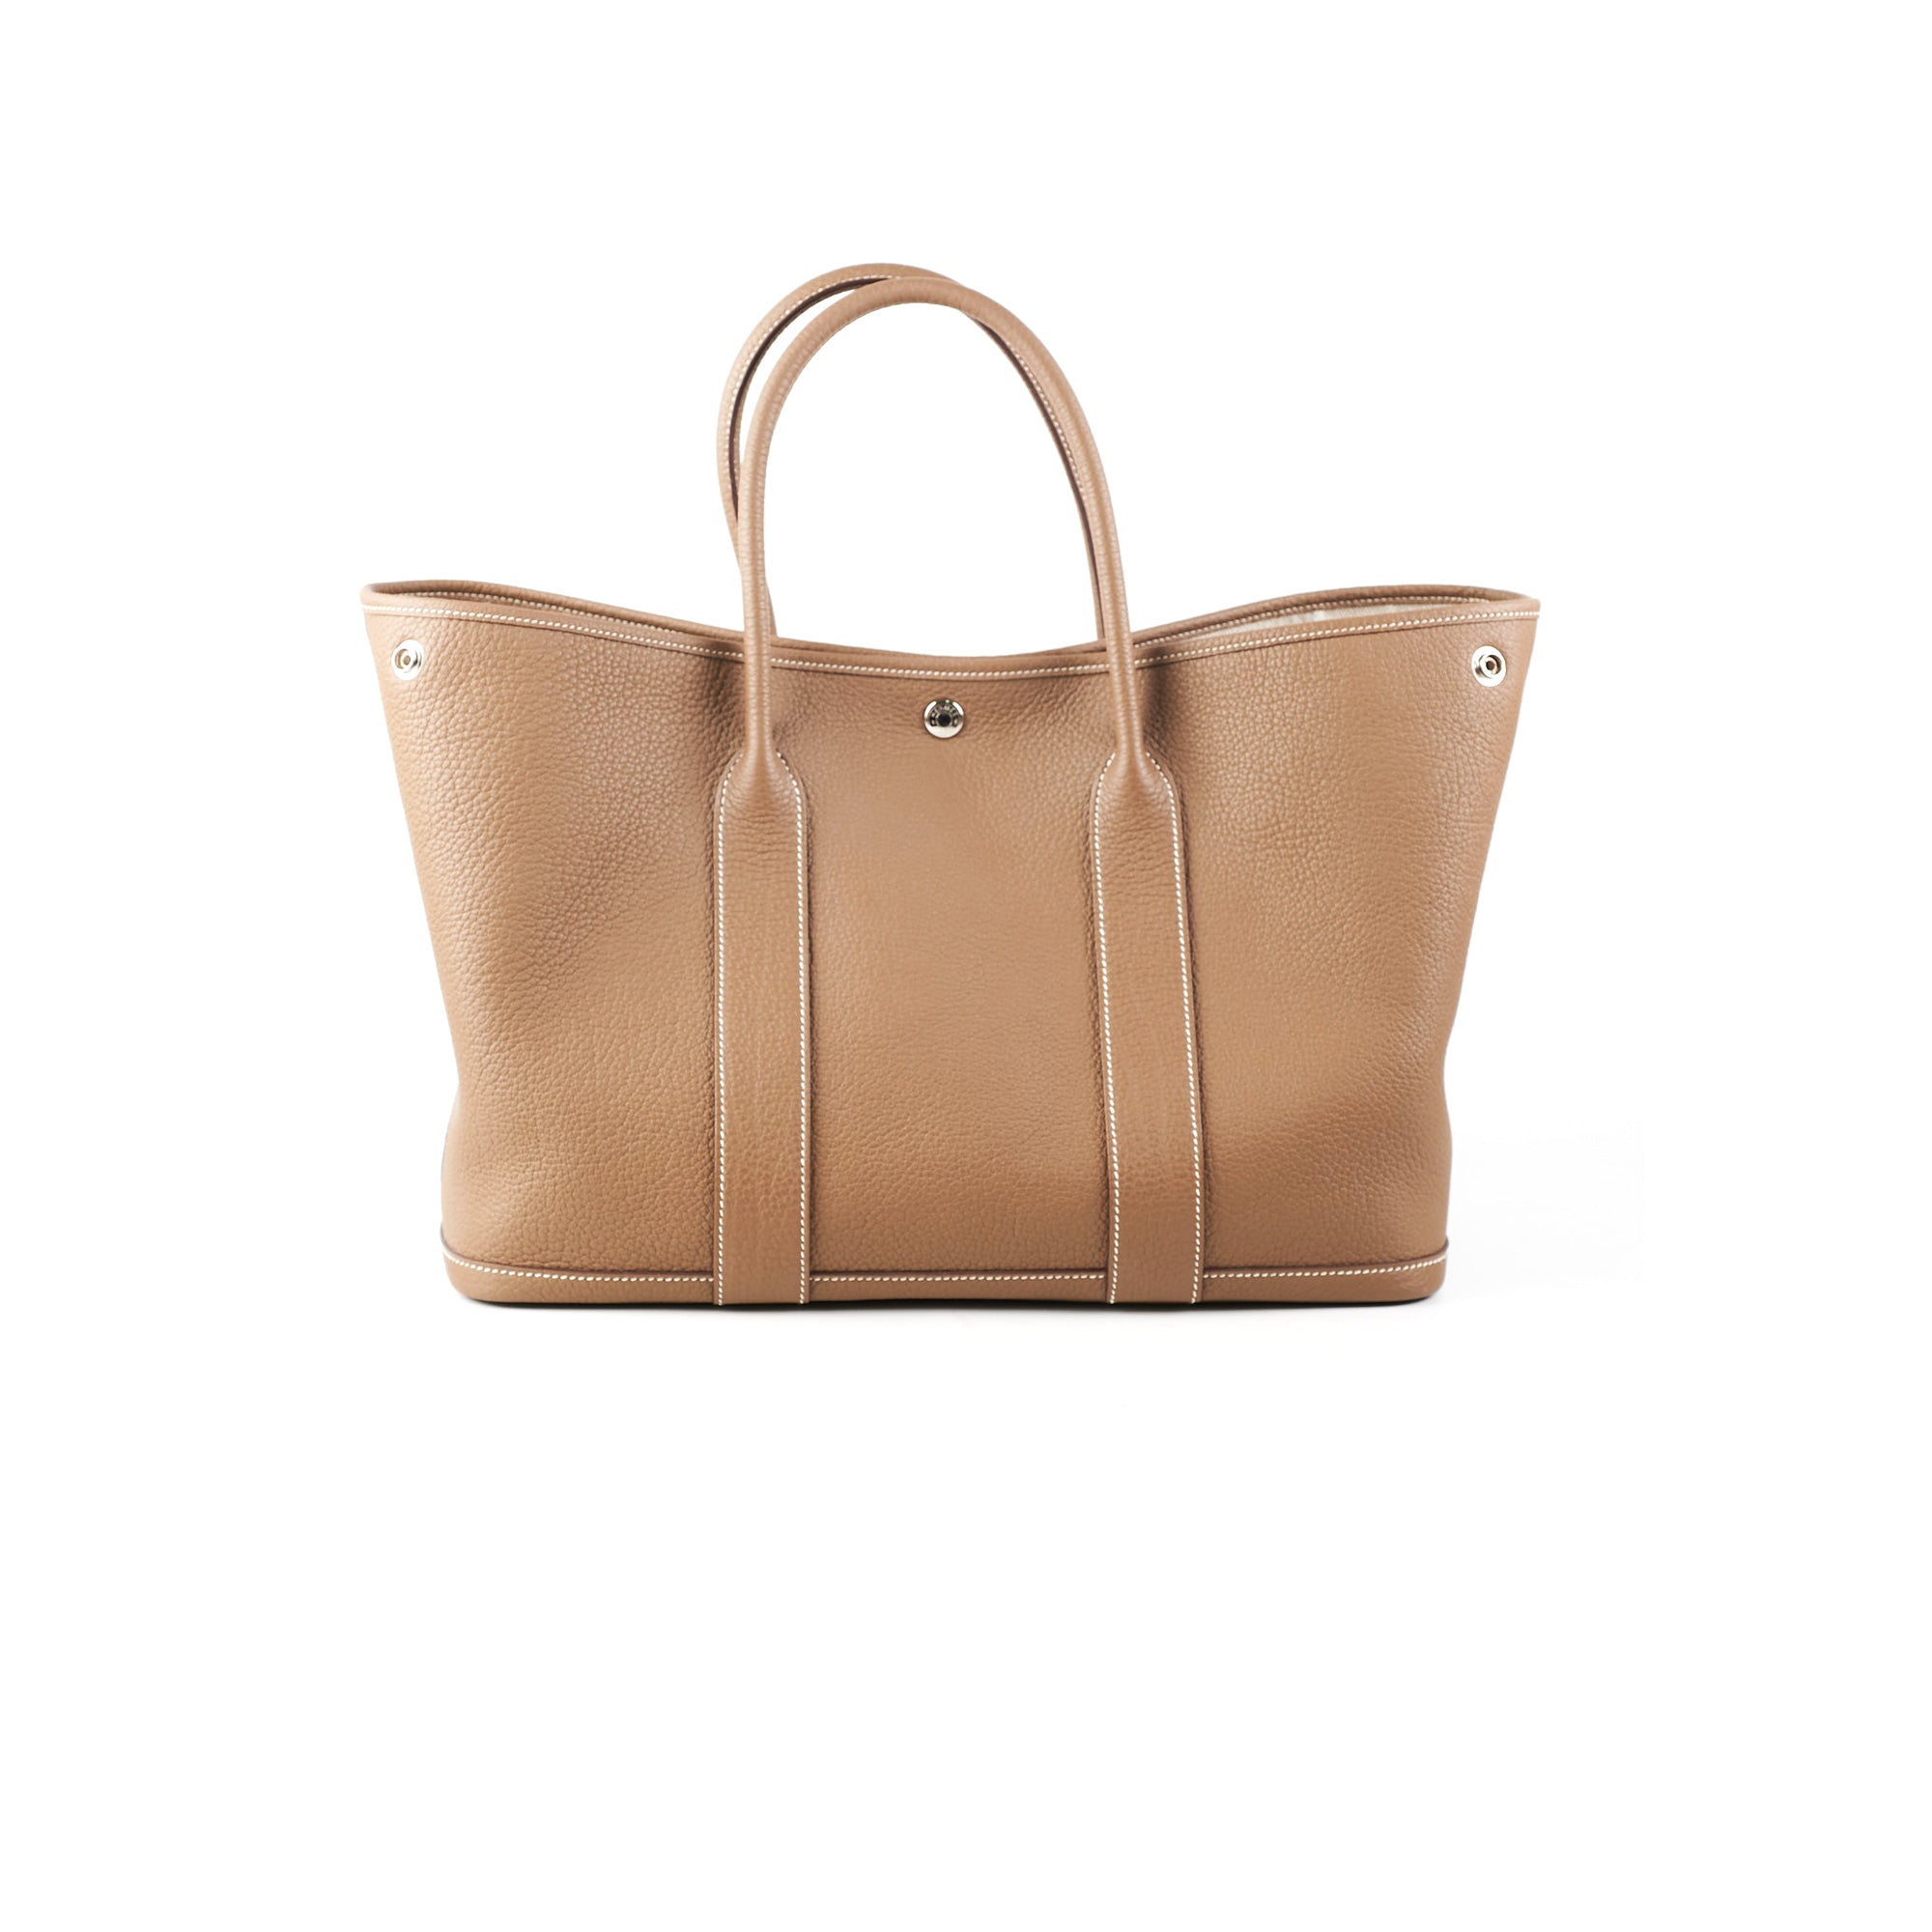 New** Hermes Garden Party 36 in most popular colour Etoupe, Luxury